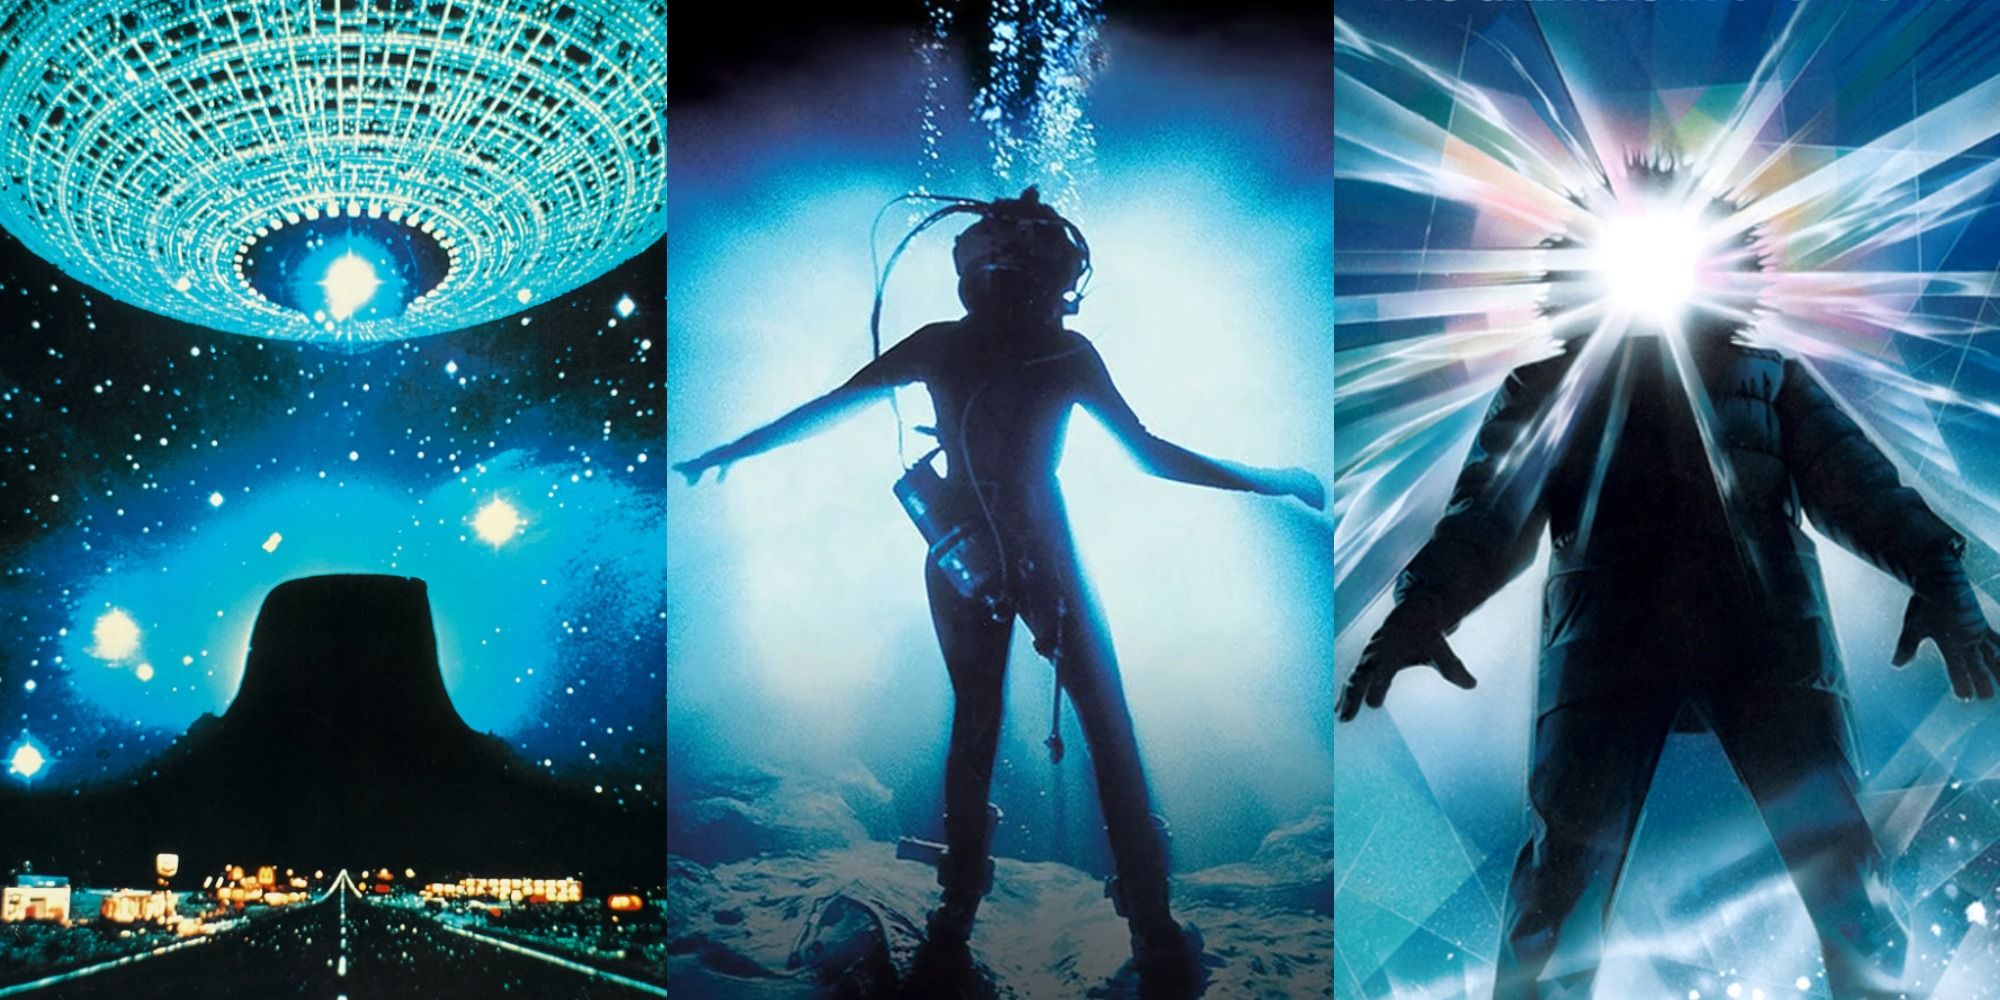 Collage of the posters for Close Encounters of the Third Kind, The Abyss and The Thing